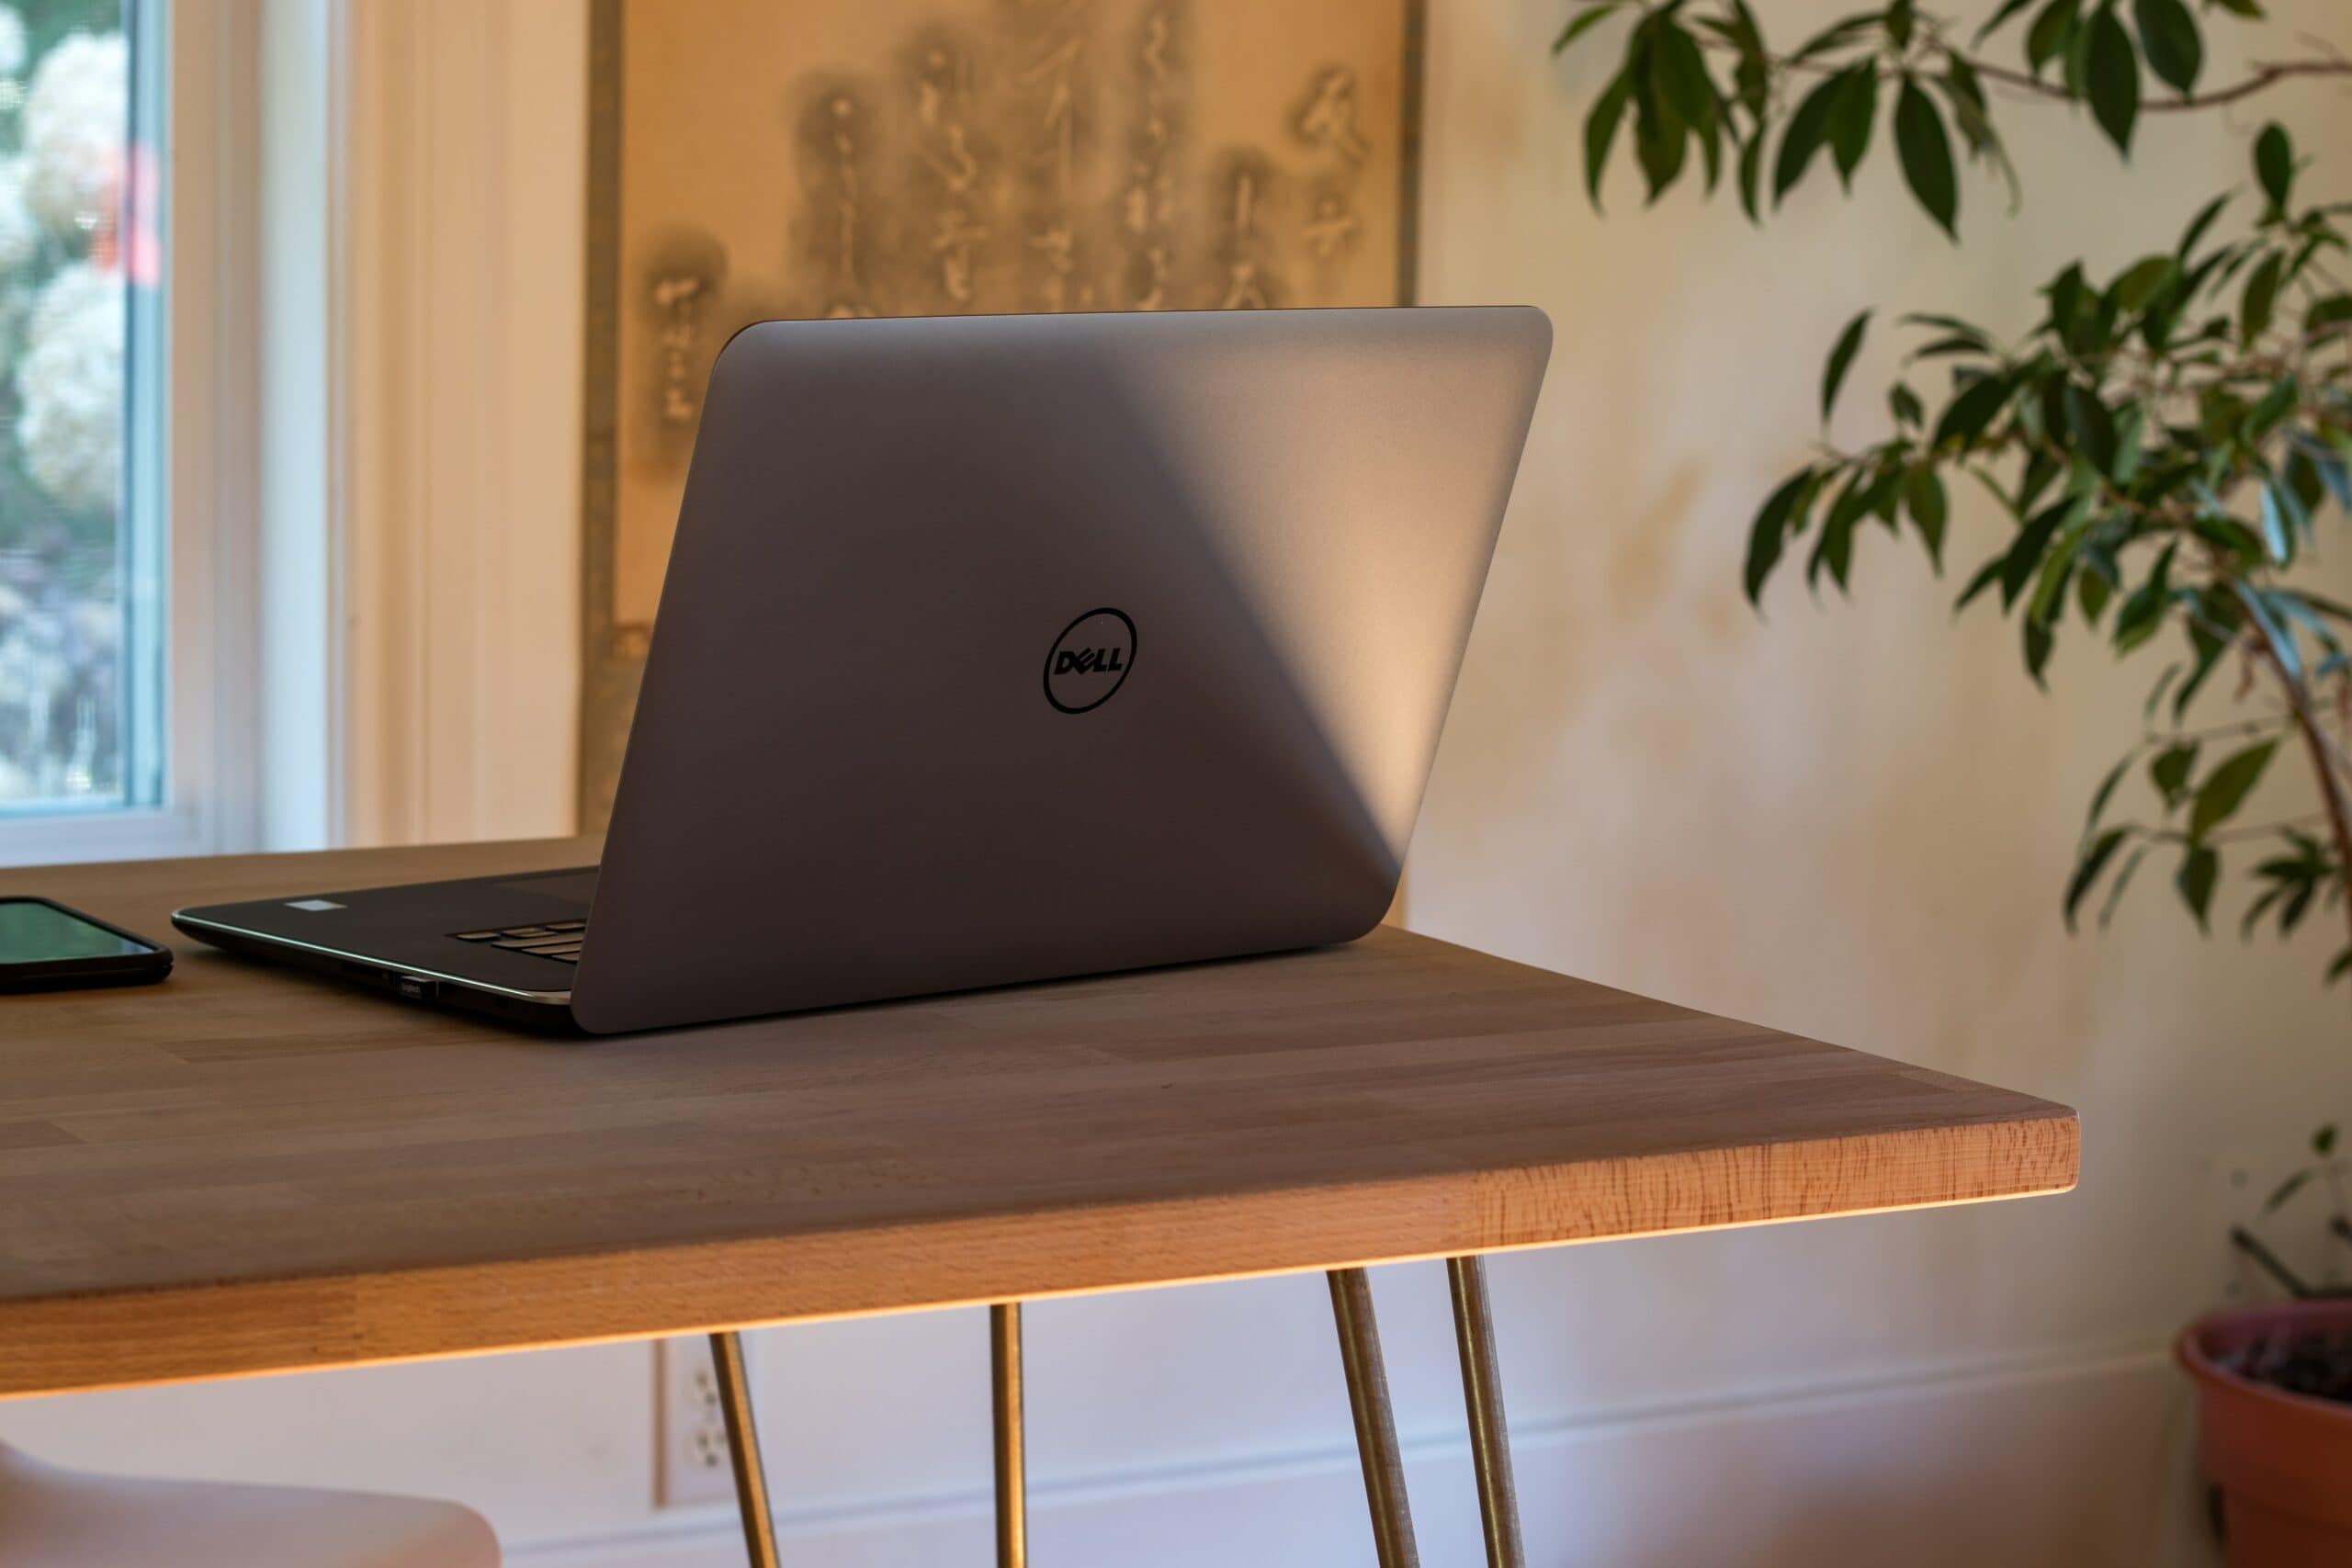 A Dell laptop sits on a wooden desk next to a plant, while running slow due to fragmentation.